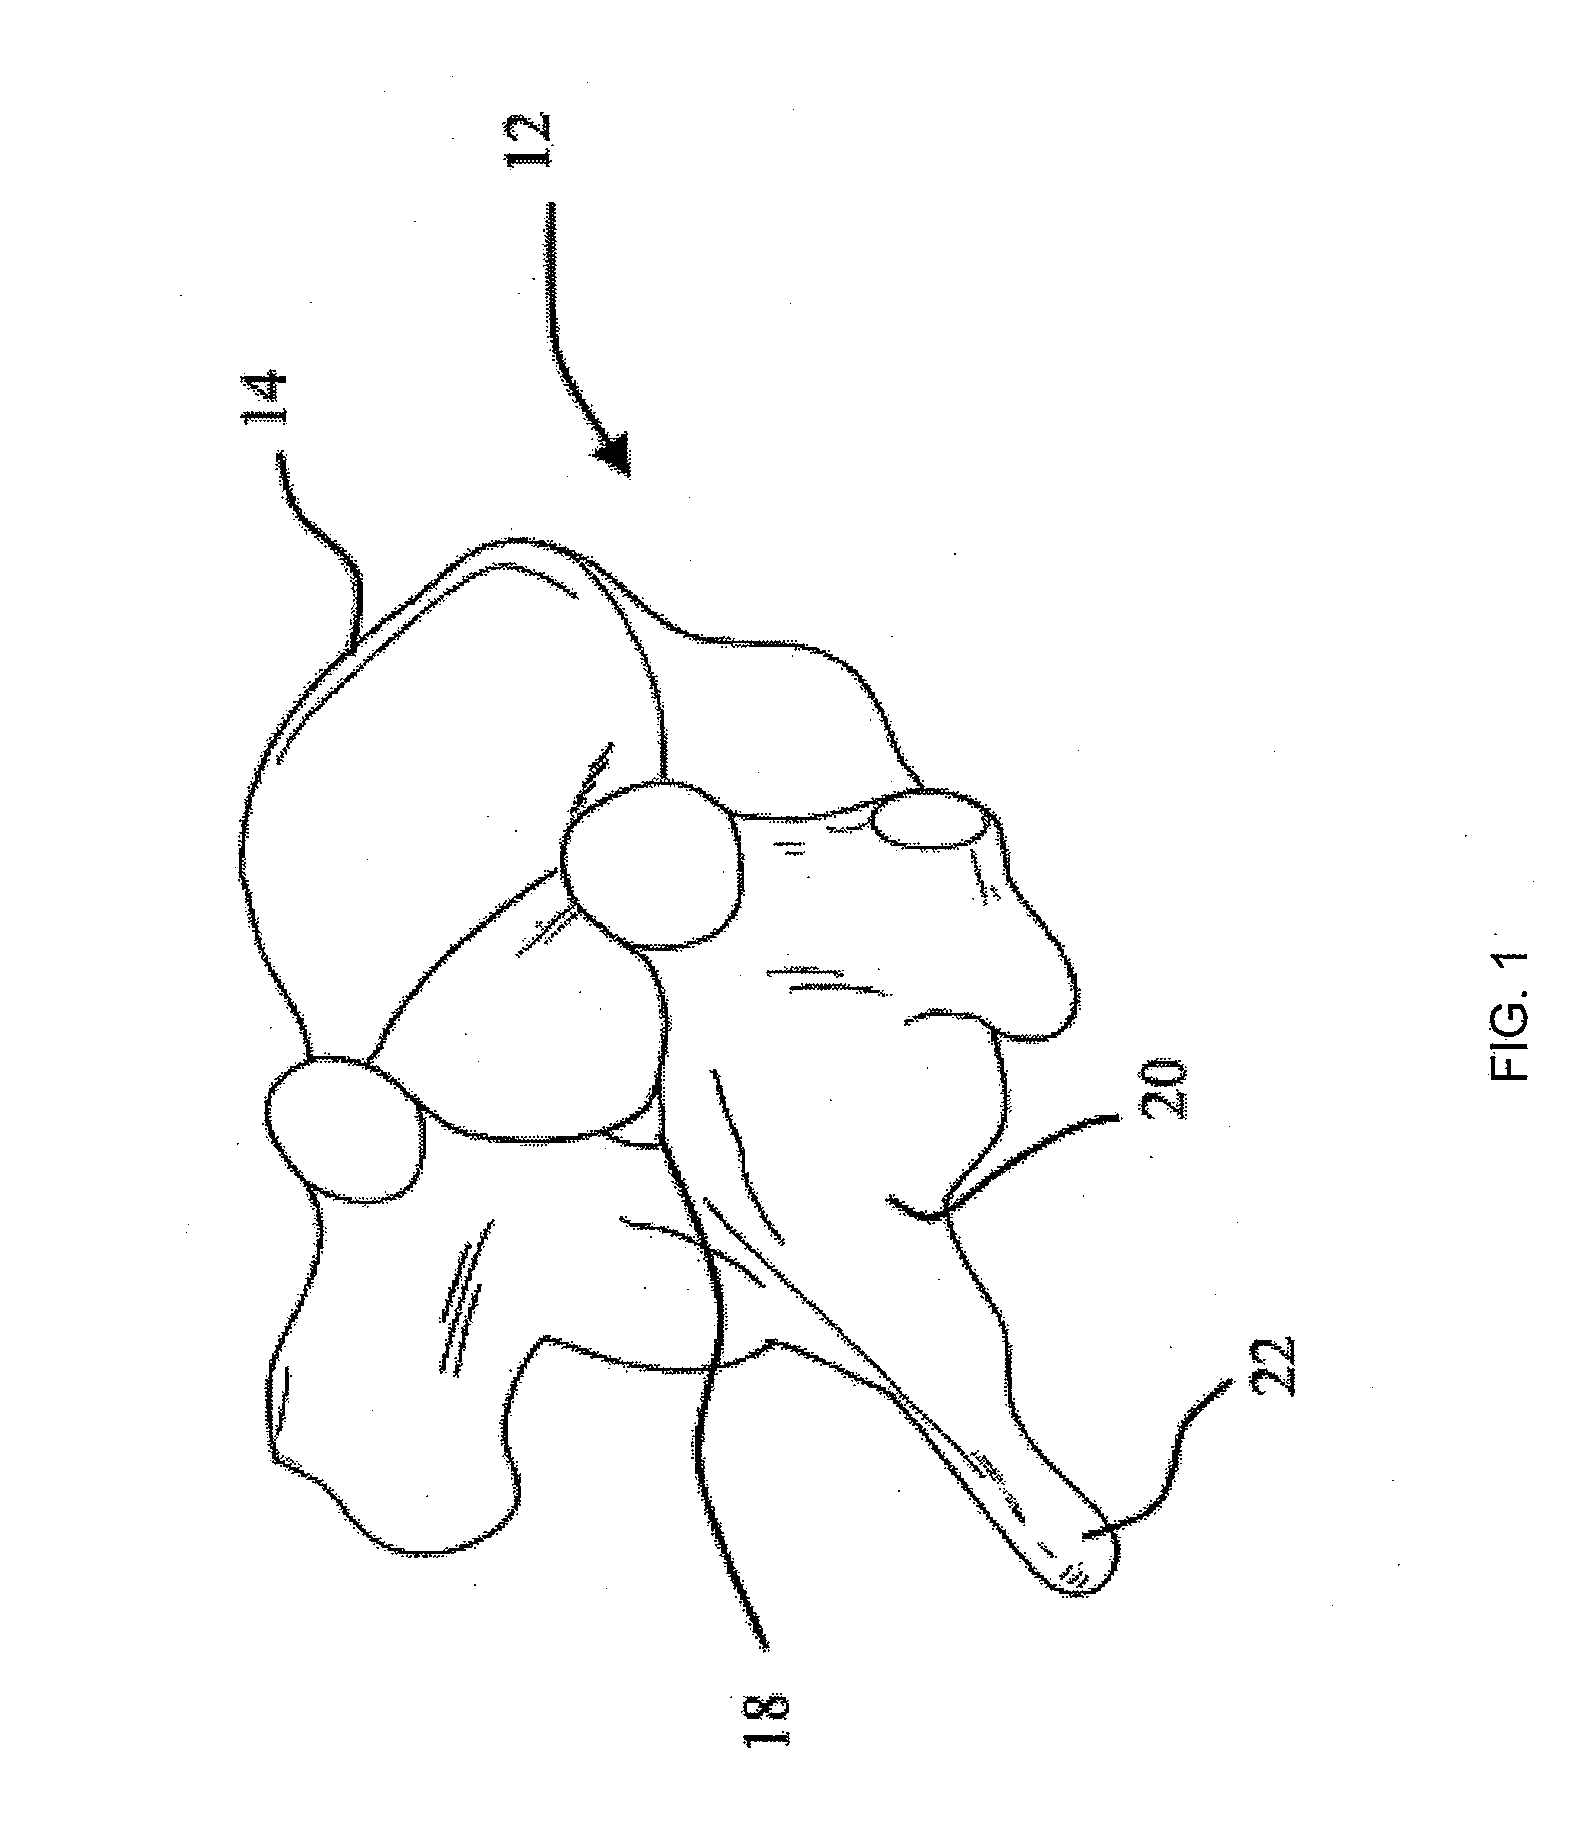 Systems, devices and methods for posterior lumbar interbody fusion